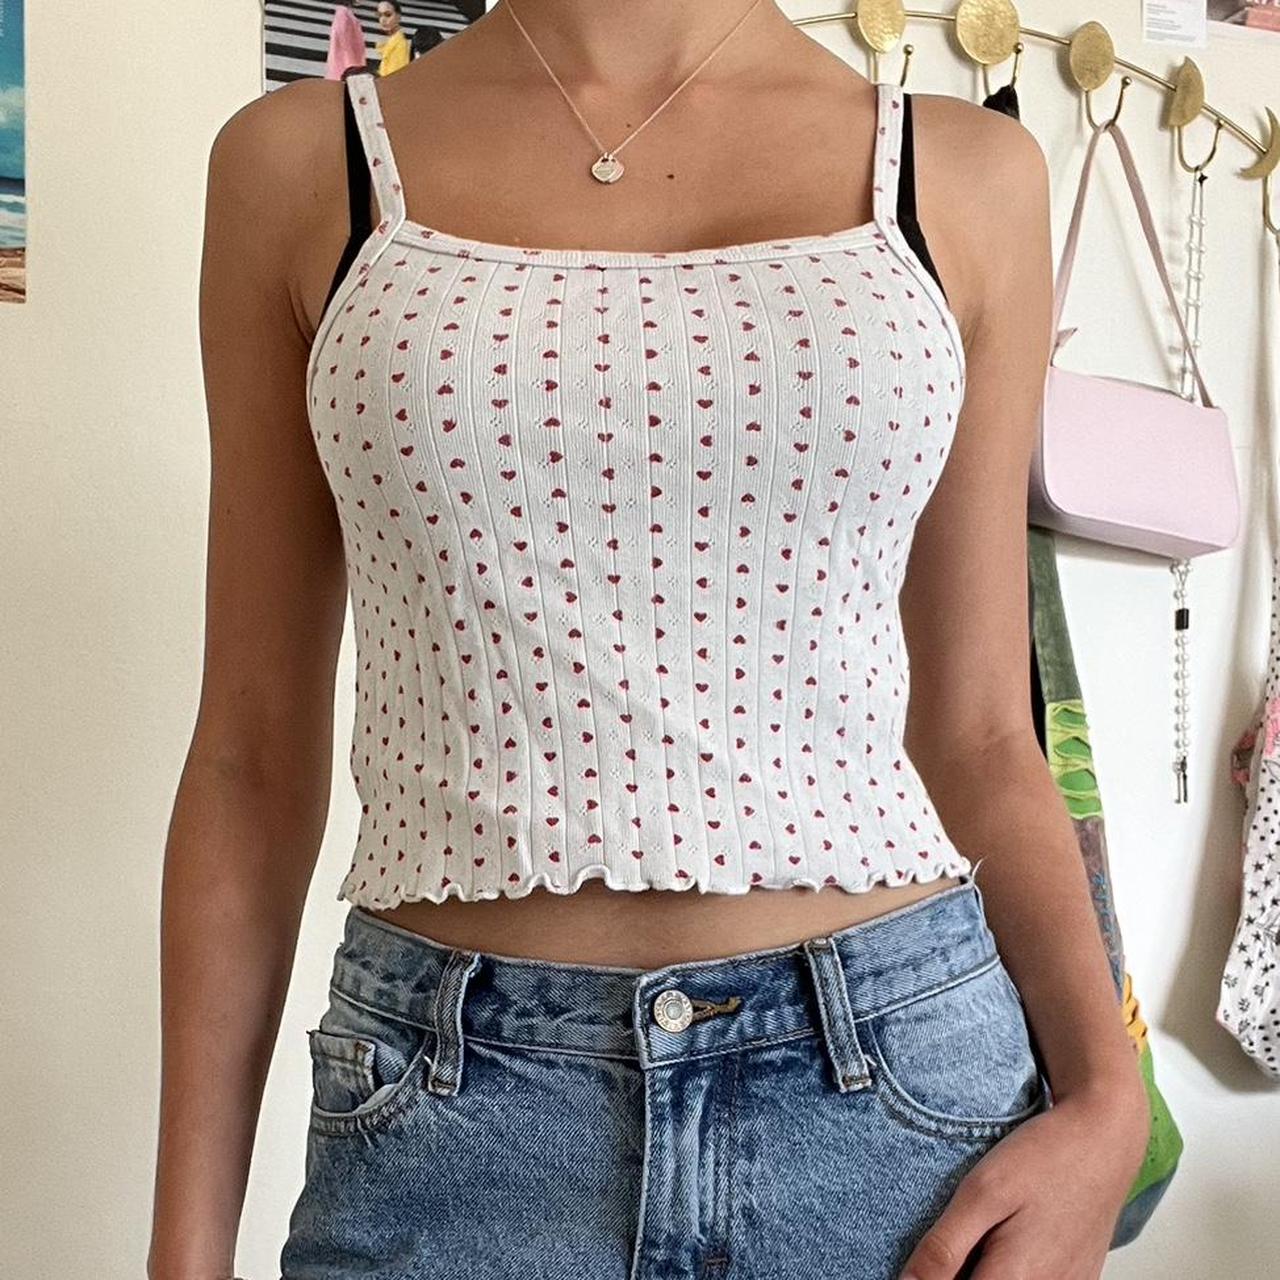 rare brandy melville heart top! not currently on